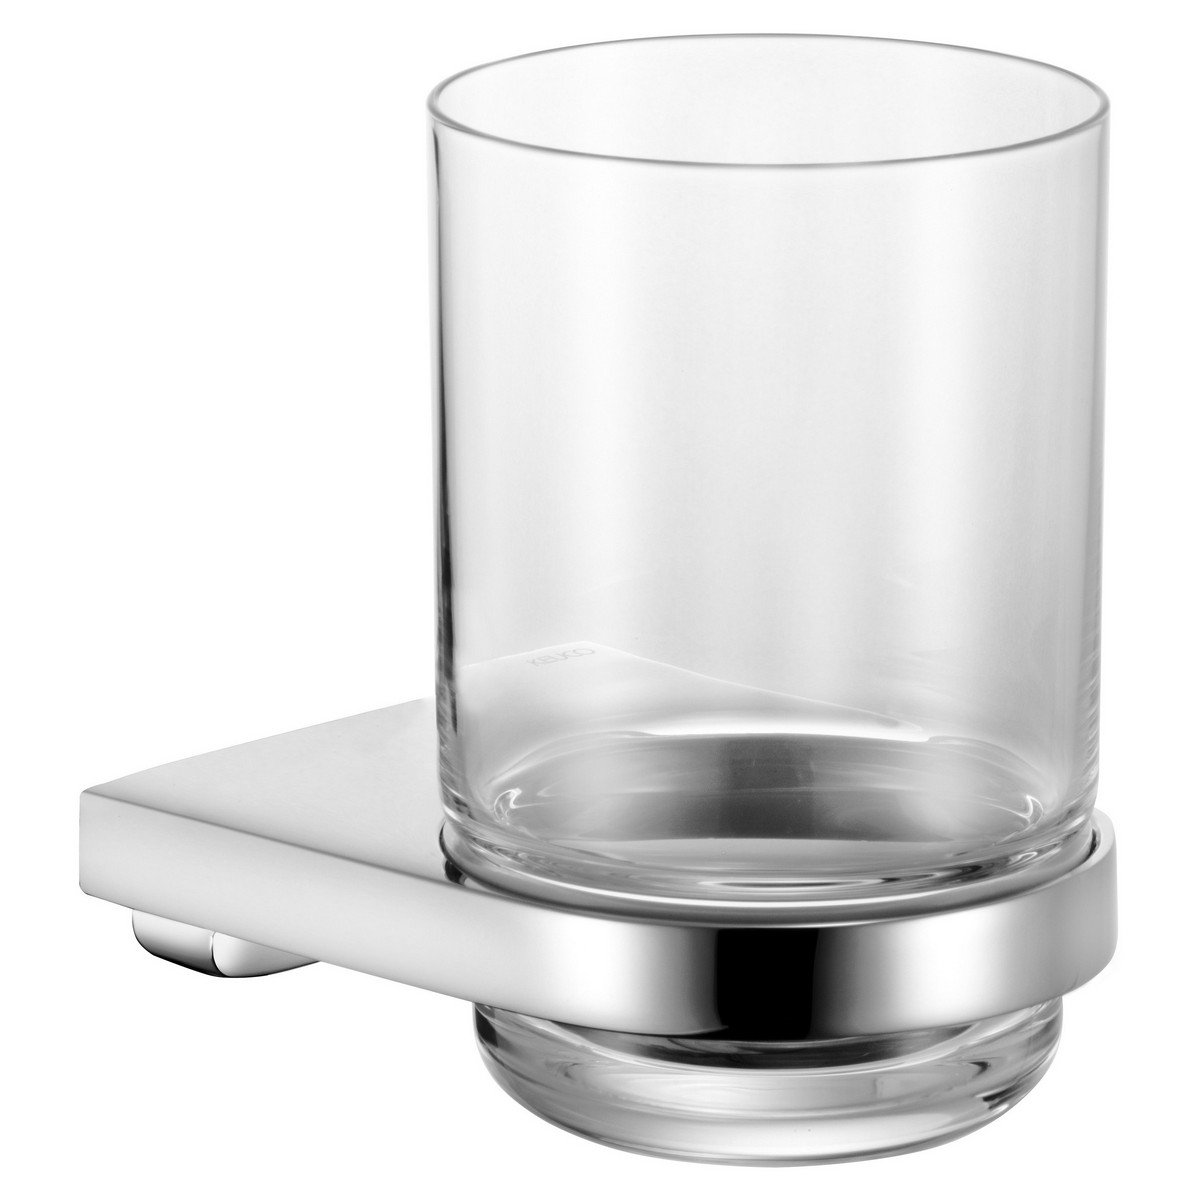 KEUCO 12750019000 MOLL 2 7/8 INCH WALL MOUNTED TUMBLER HOLDER IN POLISHED CHROME